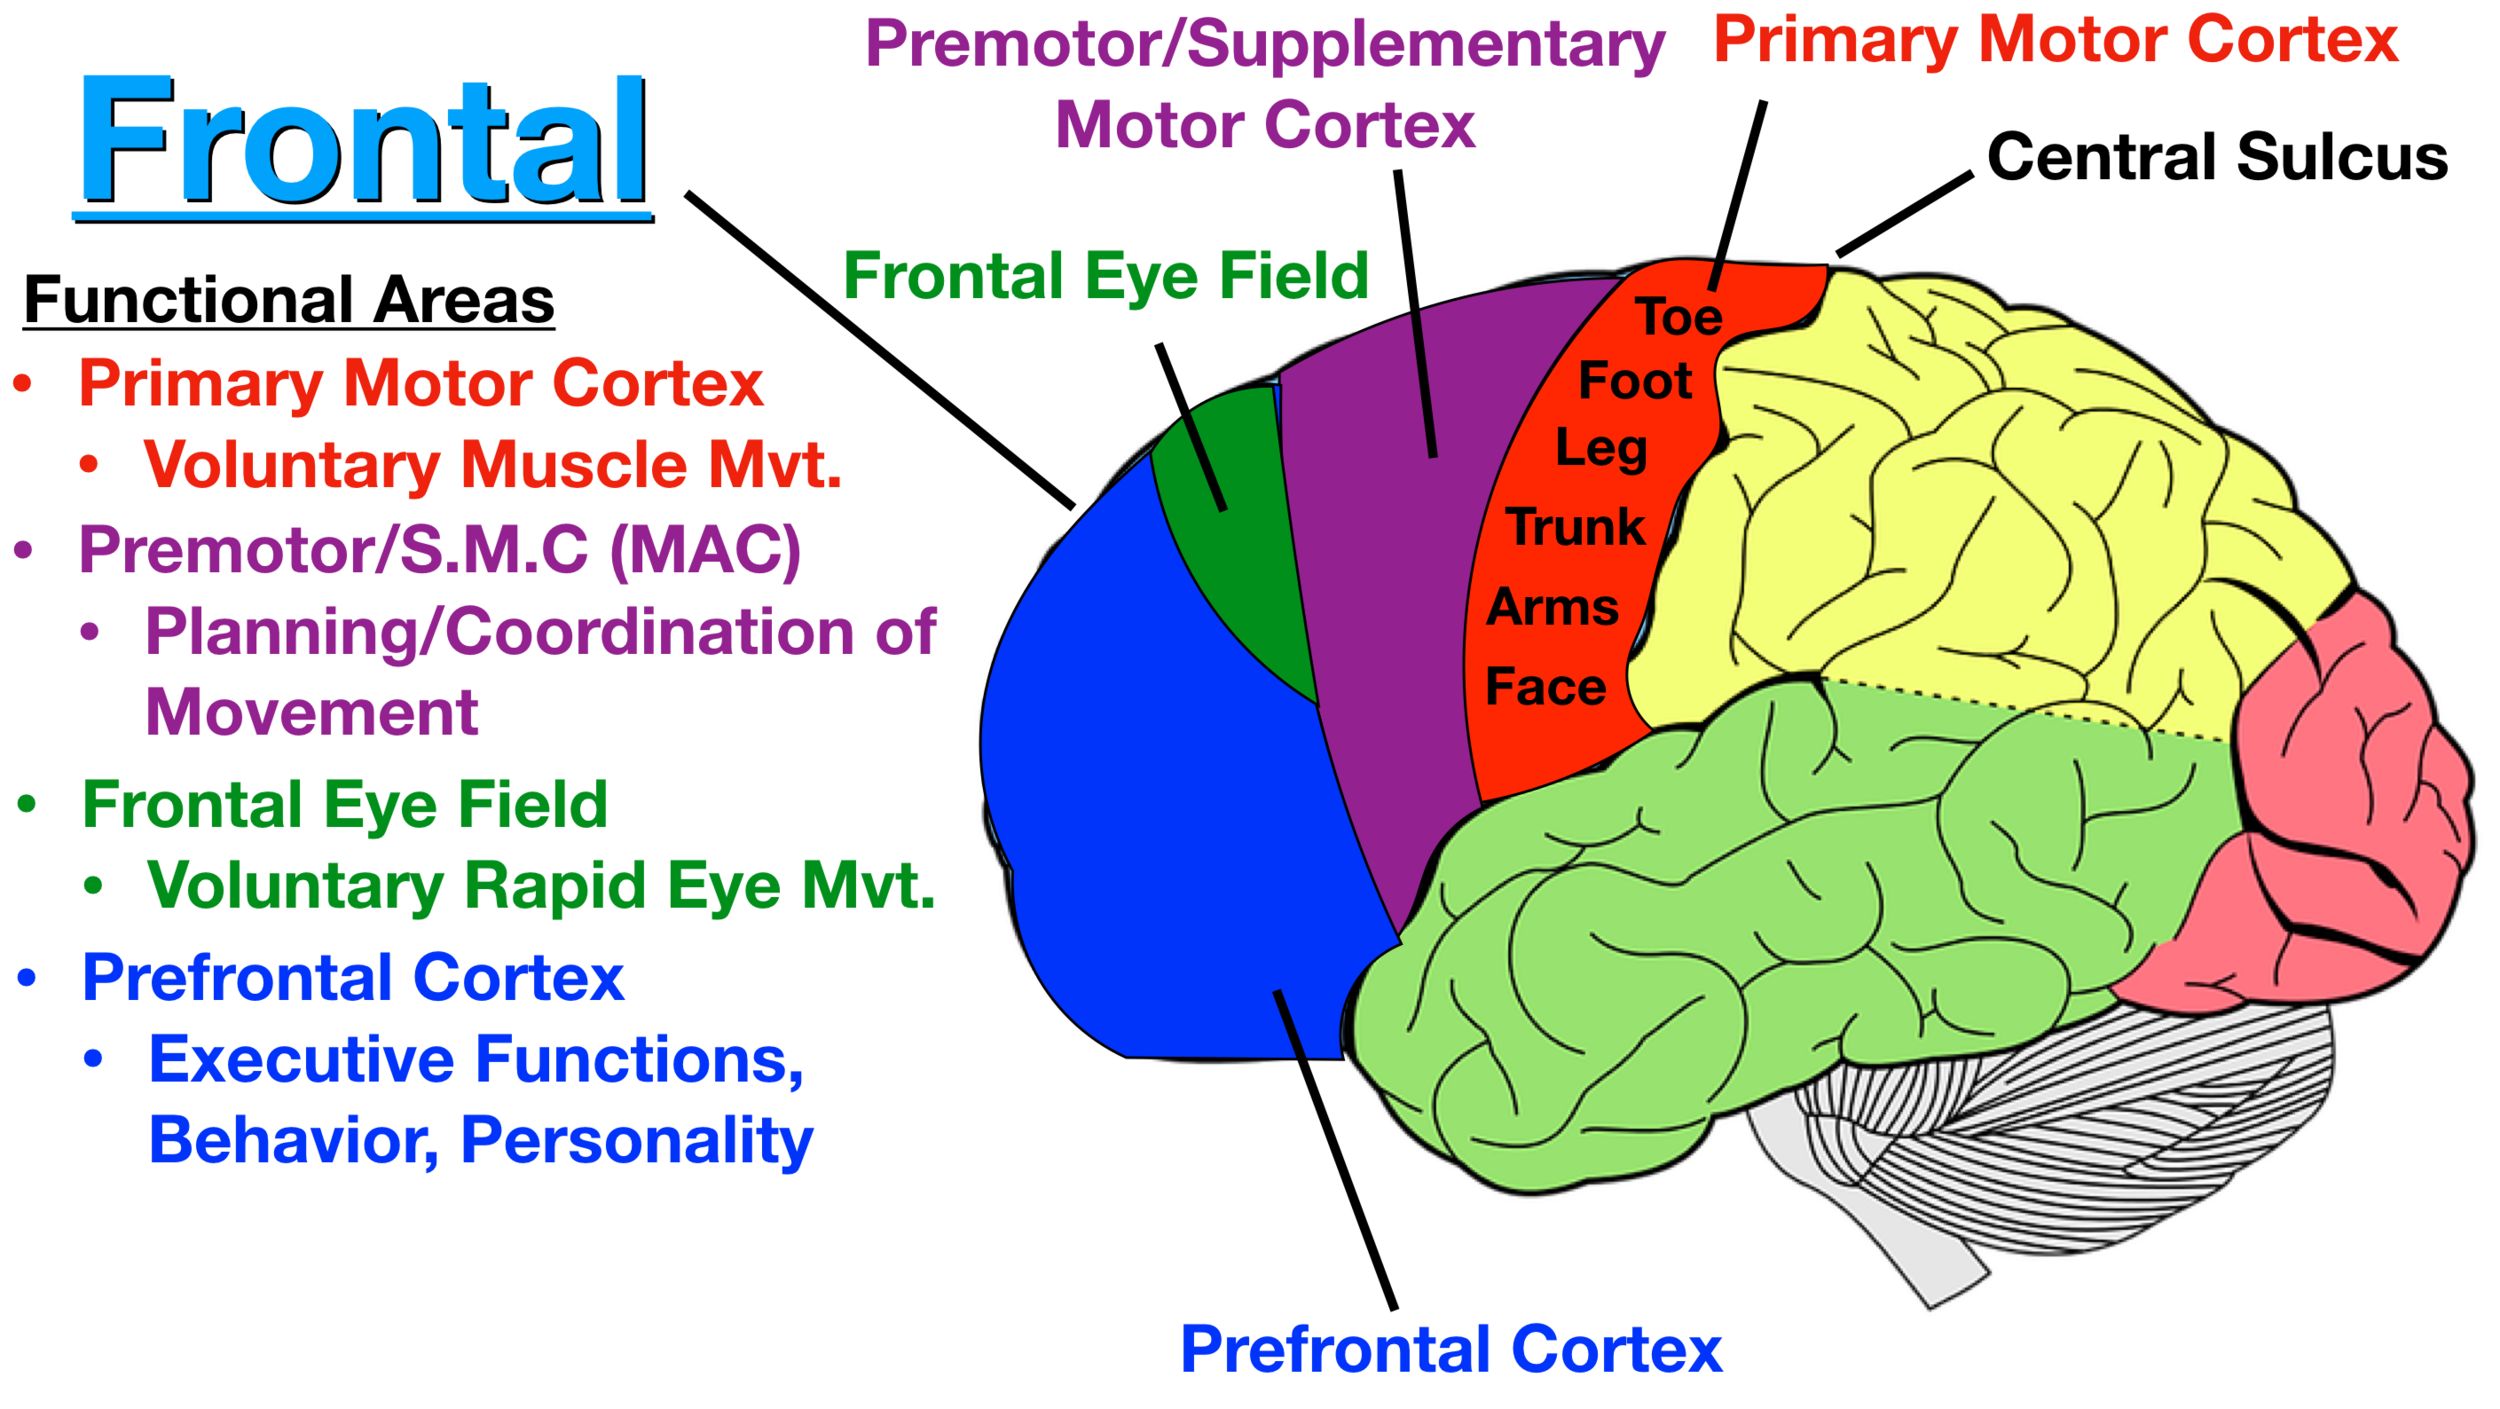 Cerebral Cortex: What It Is, Function & Location